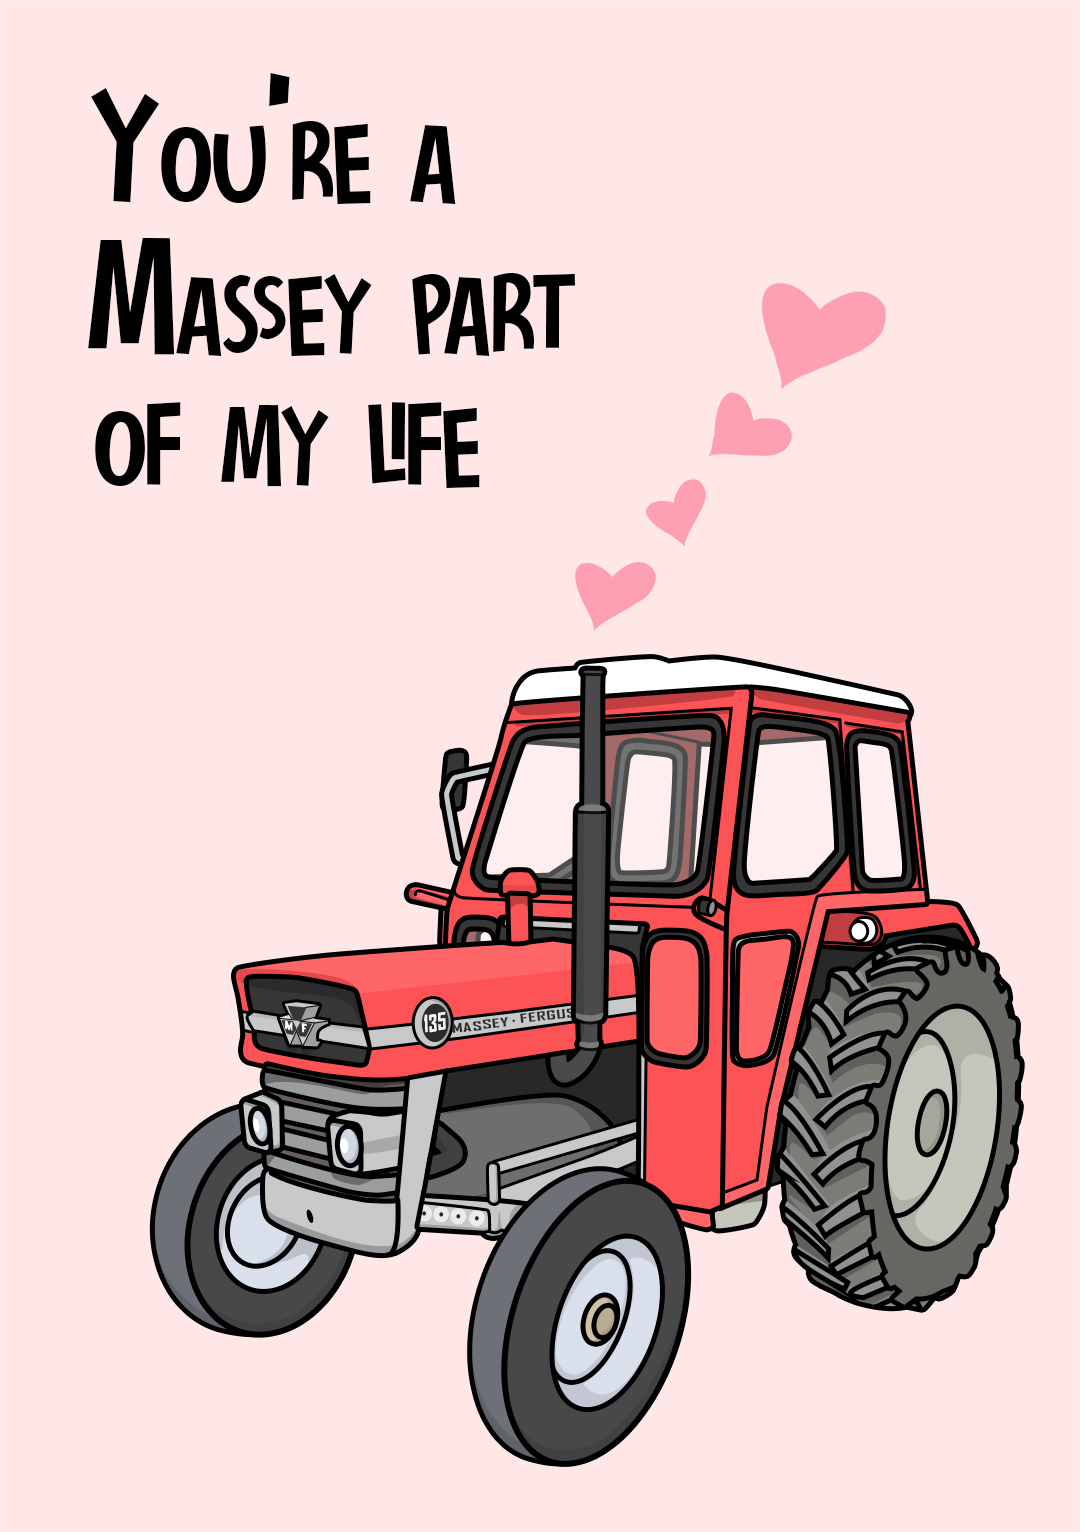 You're A Massey Part Of My Life - Valentine's Card